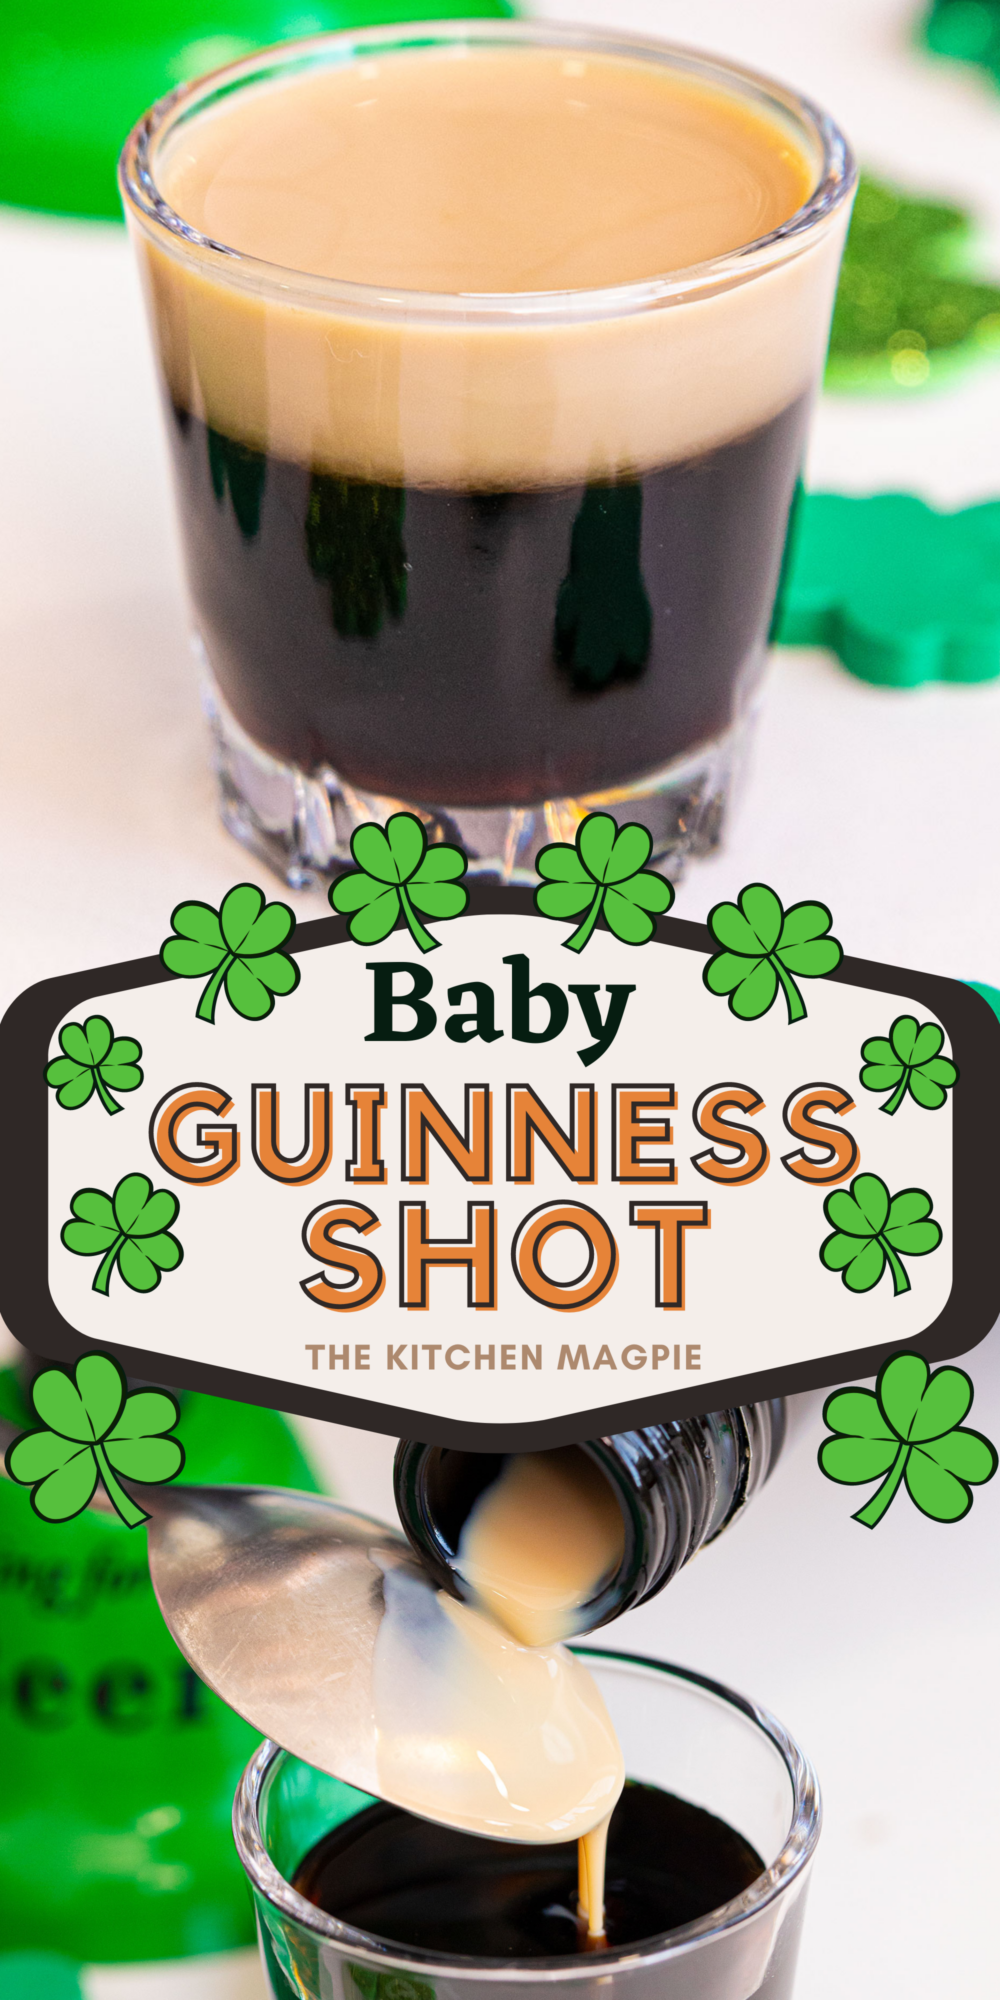 The Baby Guinness Shot is perfect for St. Patrick's Day or any other holiday, really. It's a fun and great tasting shot. #stpatricksday #stpatricks #irish #guinness #kahlua #irishcream